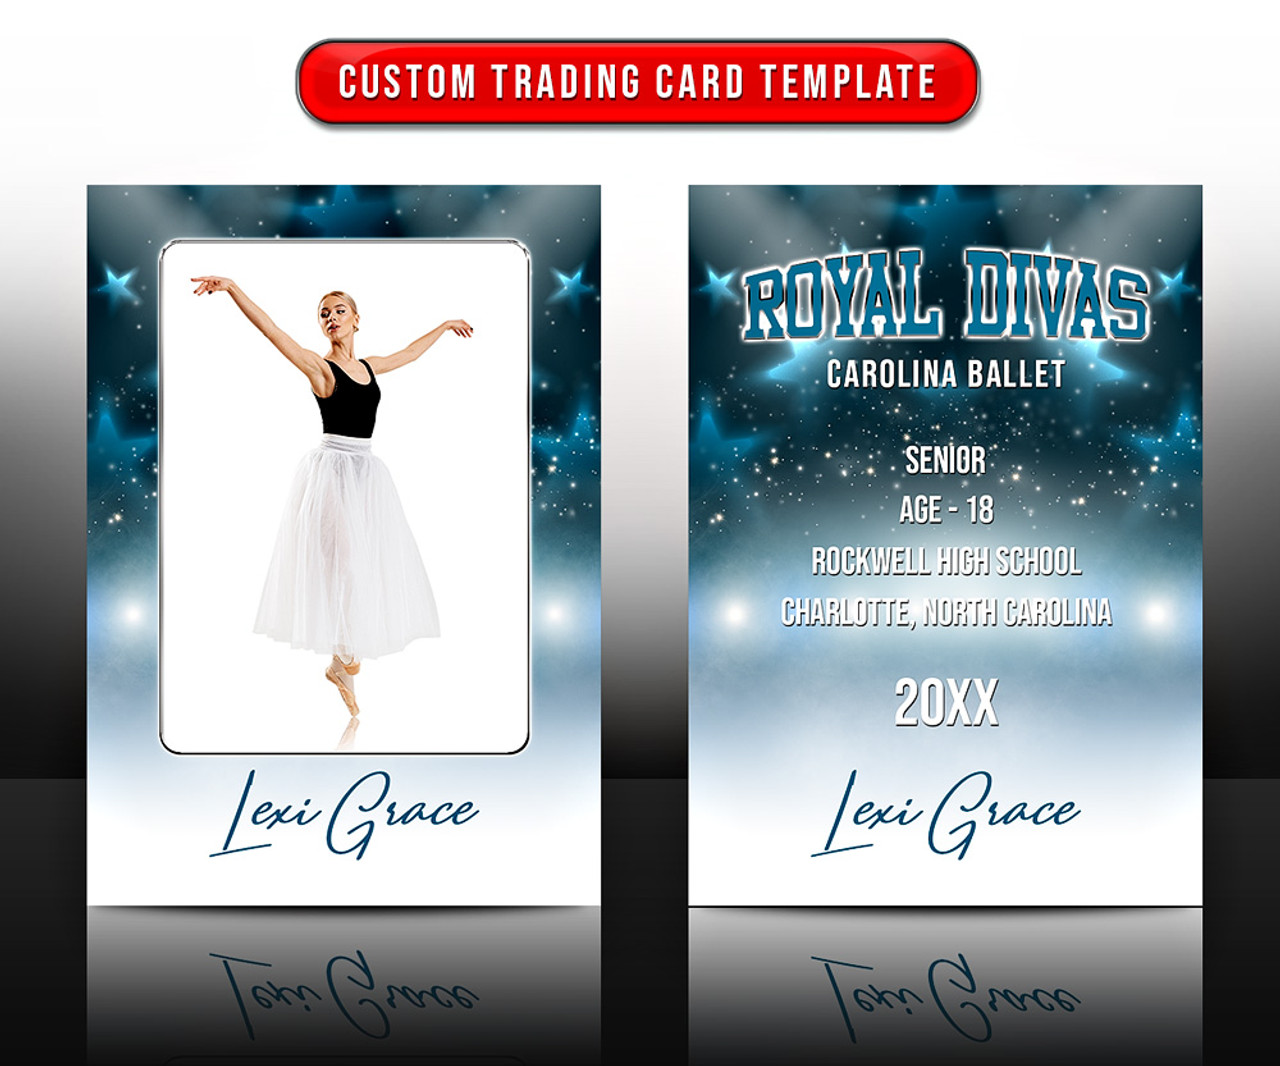 MULTI-SPORT TRADING CARDS AND 5X7 TEMPLATE - MYSTICAL STARS